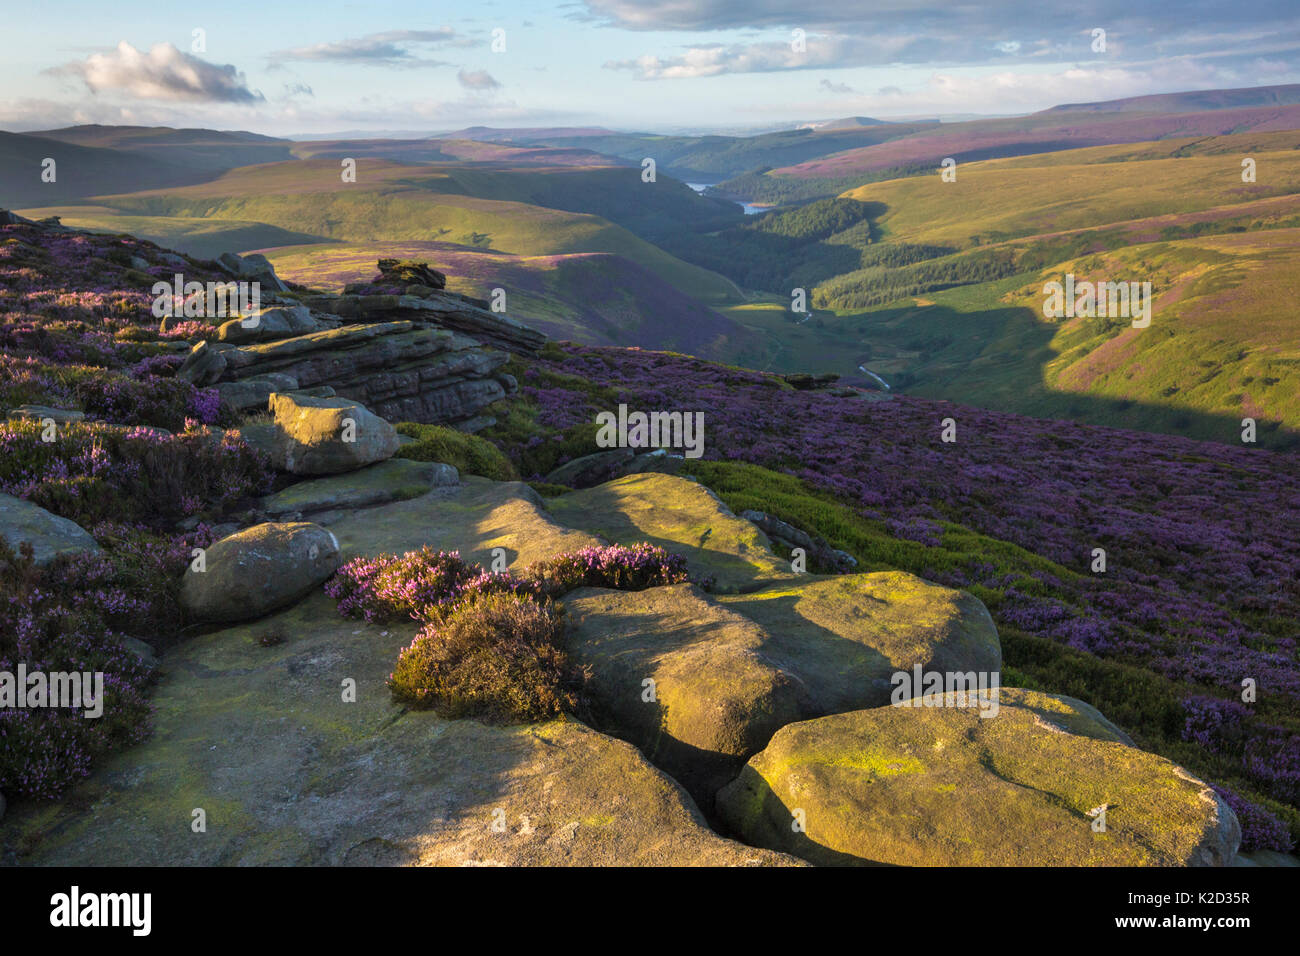 Crow Stones Edge looking towards Howden and Derwent Reservoirs. Peak District National Park, Derbyshire, UK. August 2015. Stock Photo